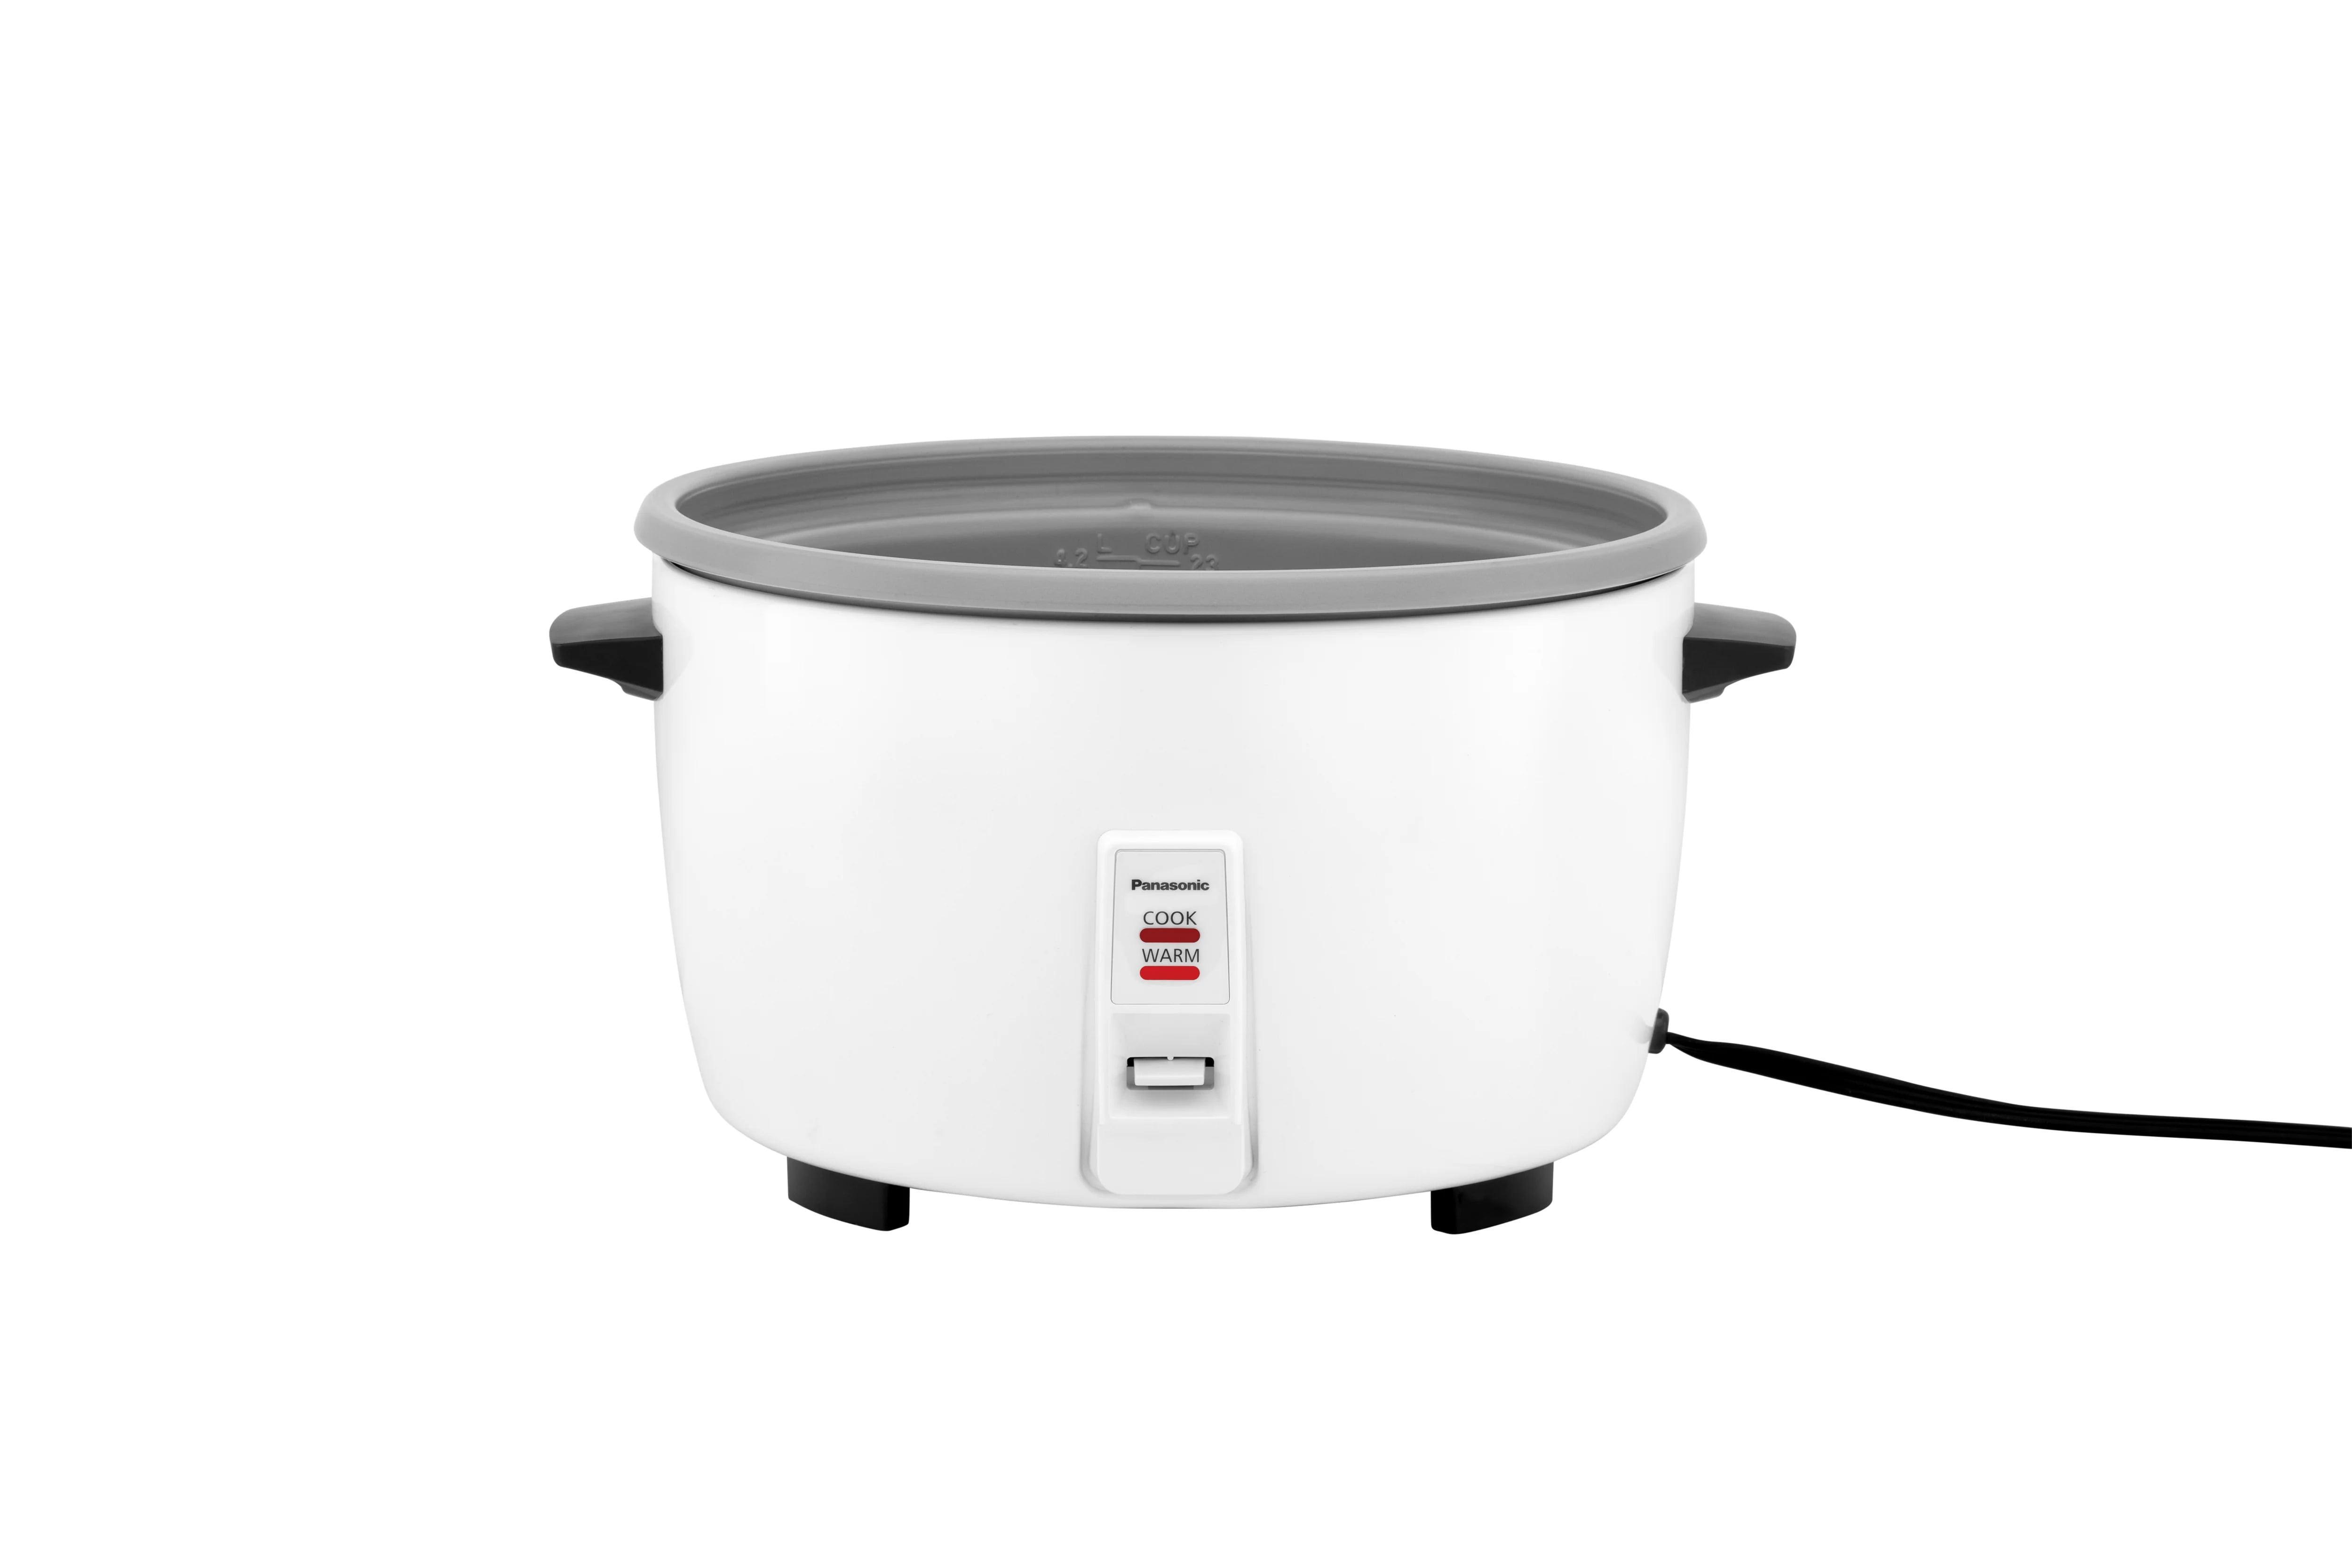 Panasonic Electric Rice Cooker with NSF Aluminum Pan 23 CUP White SR-GB42H